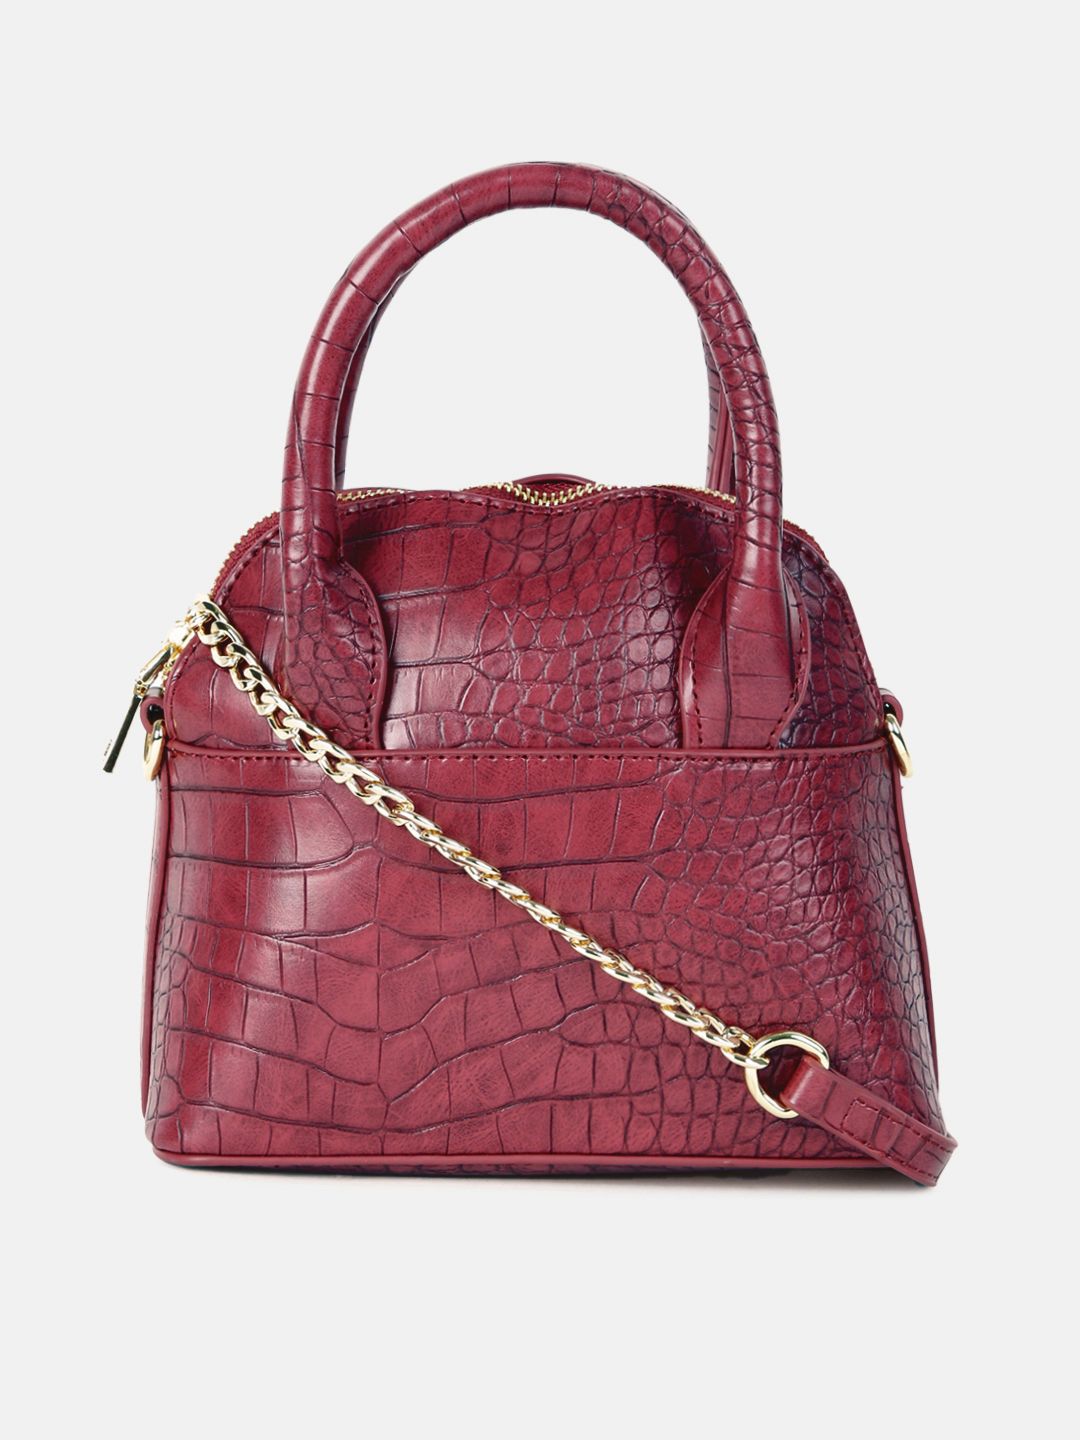 DressBerry Burgundy Textured PU Structured Sling Bag Price in India